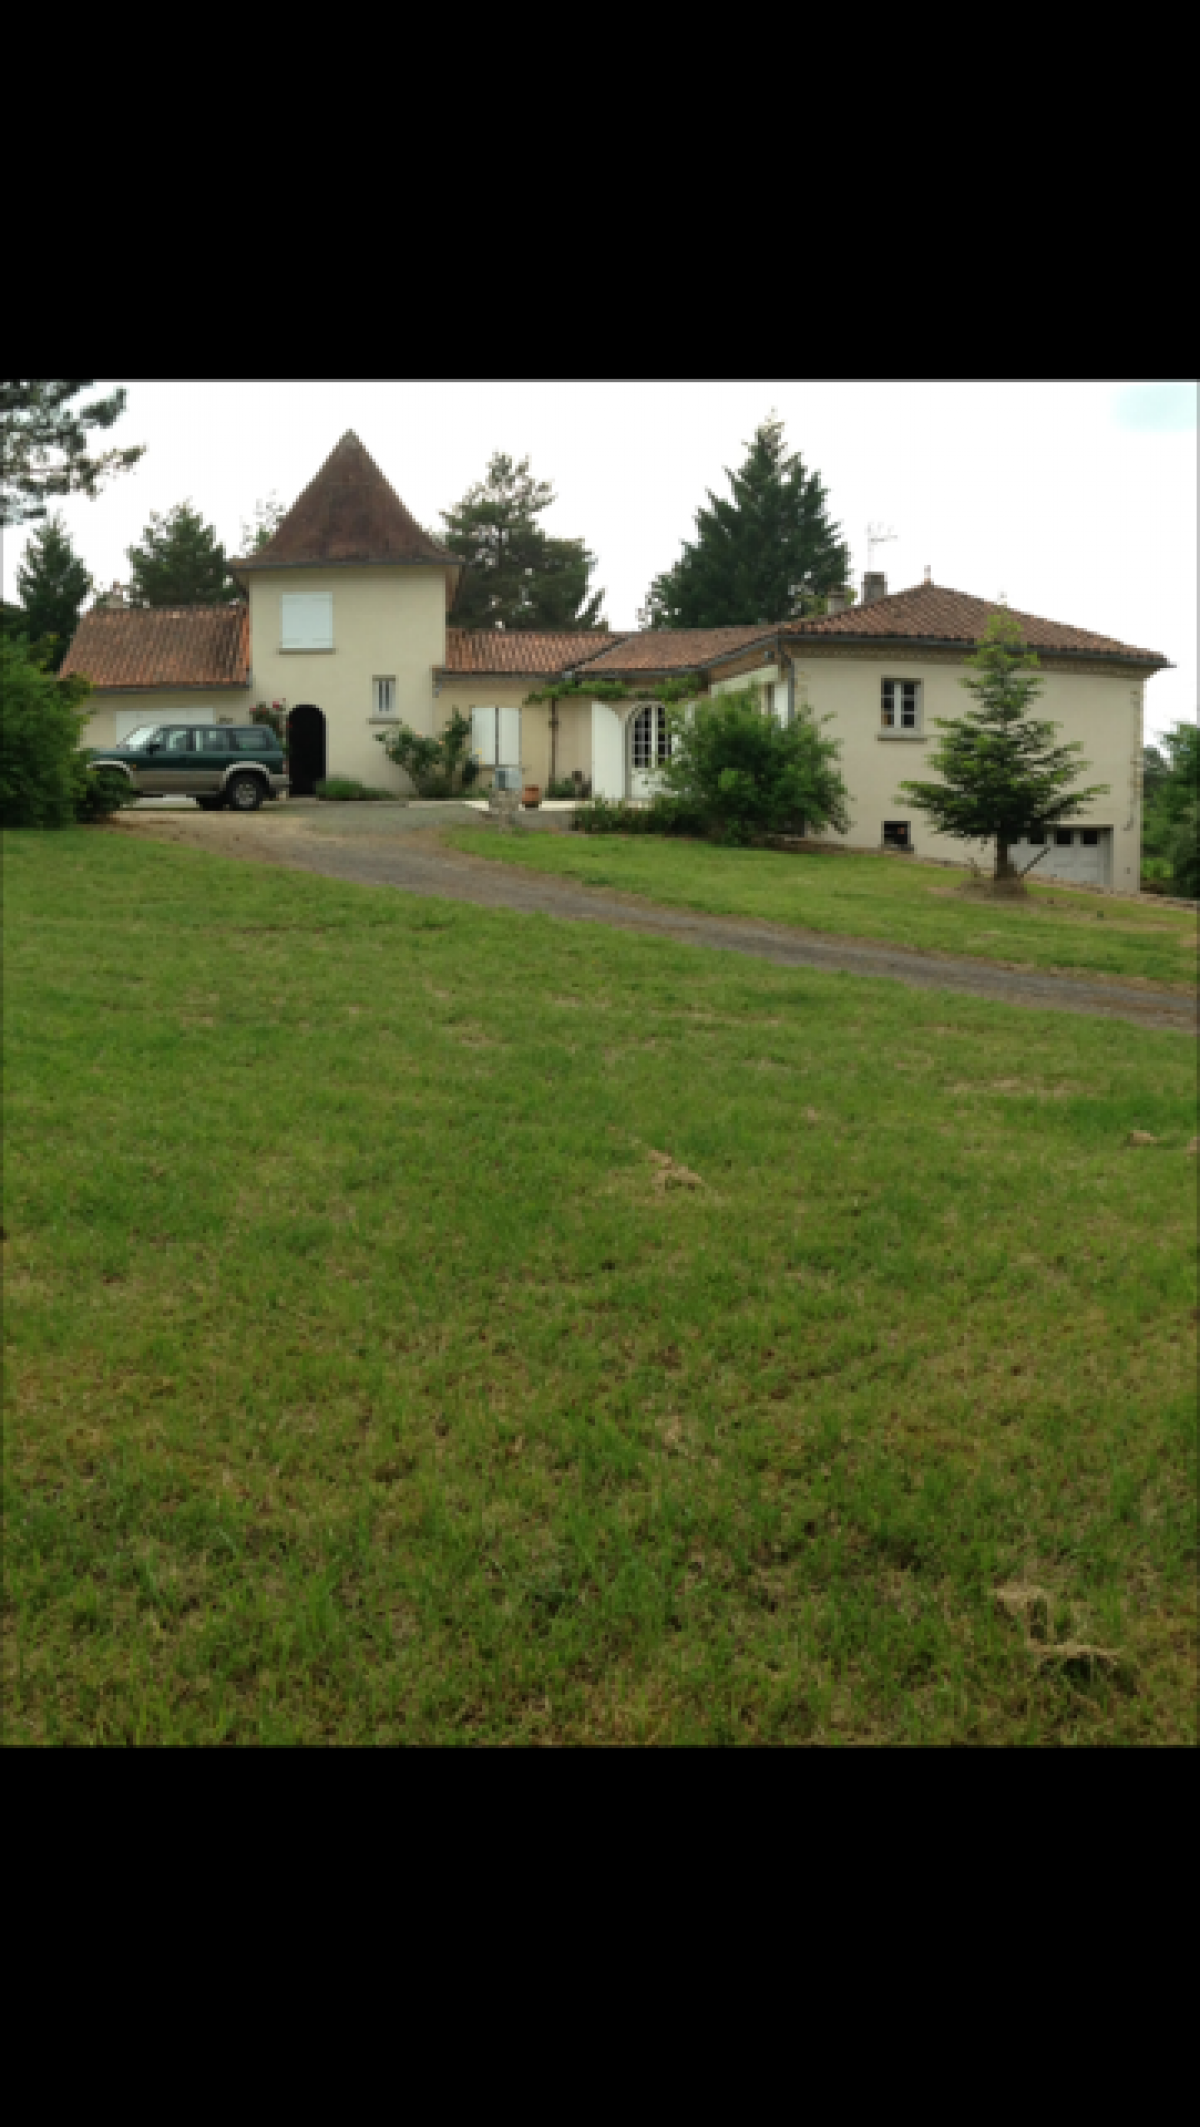 Picture of Vacation Home For Sale in Nontron, Aquitaine, France